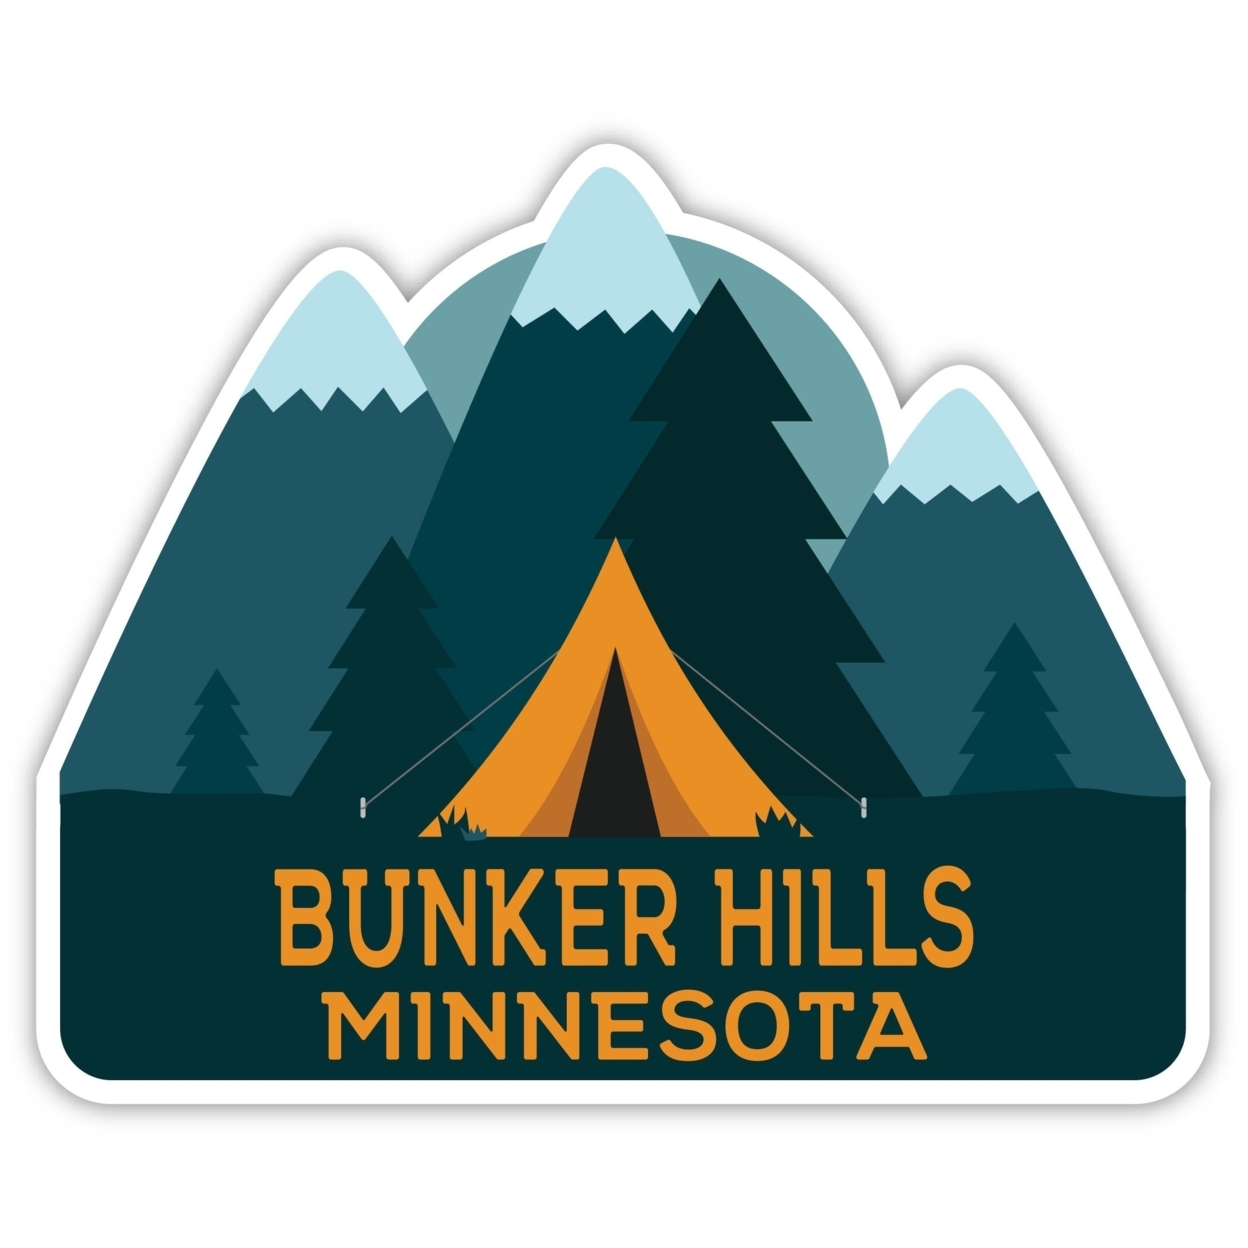 Bunker Hills Minnesota Souvenir Decorative Stickers (Choose Theme And Size) - 4-Pack, 2-Inch, Tent